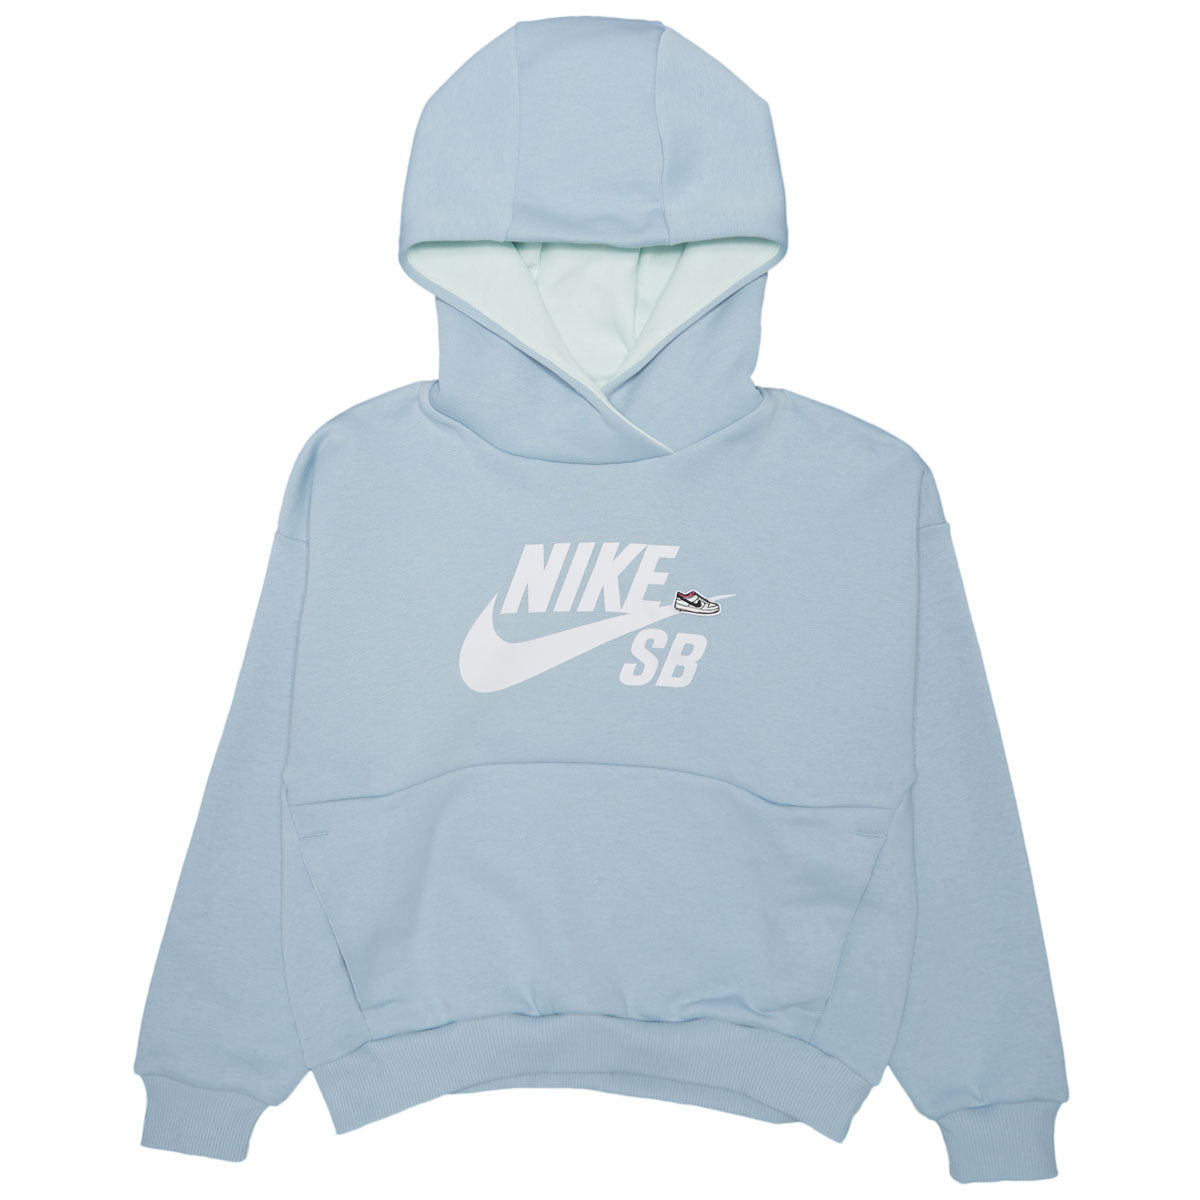 Nike SB Youth Icon Fleece Easy On Hoodie - Light Armory Blue/Barely Green/White image 1